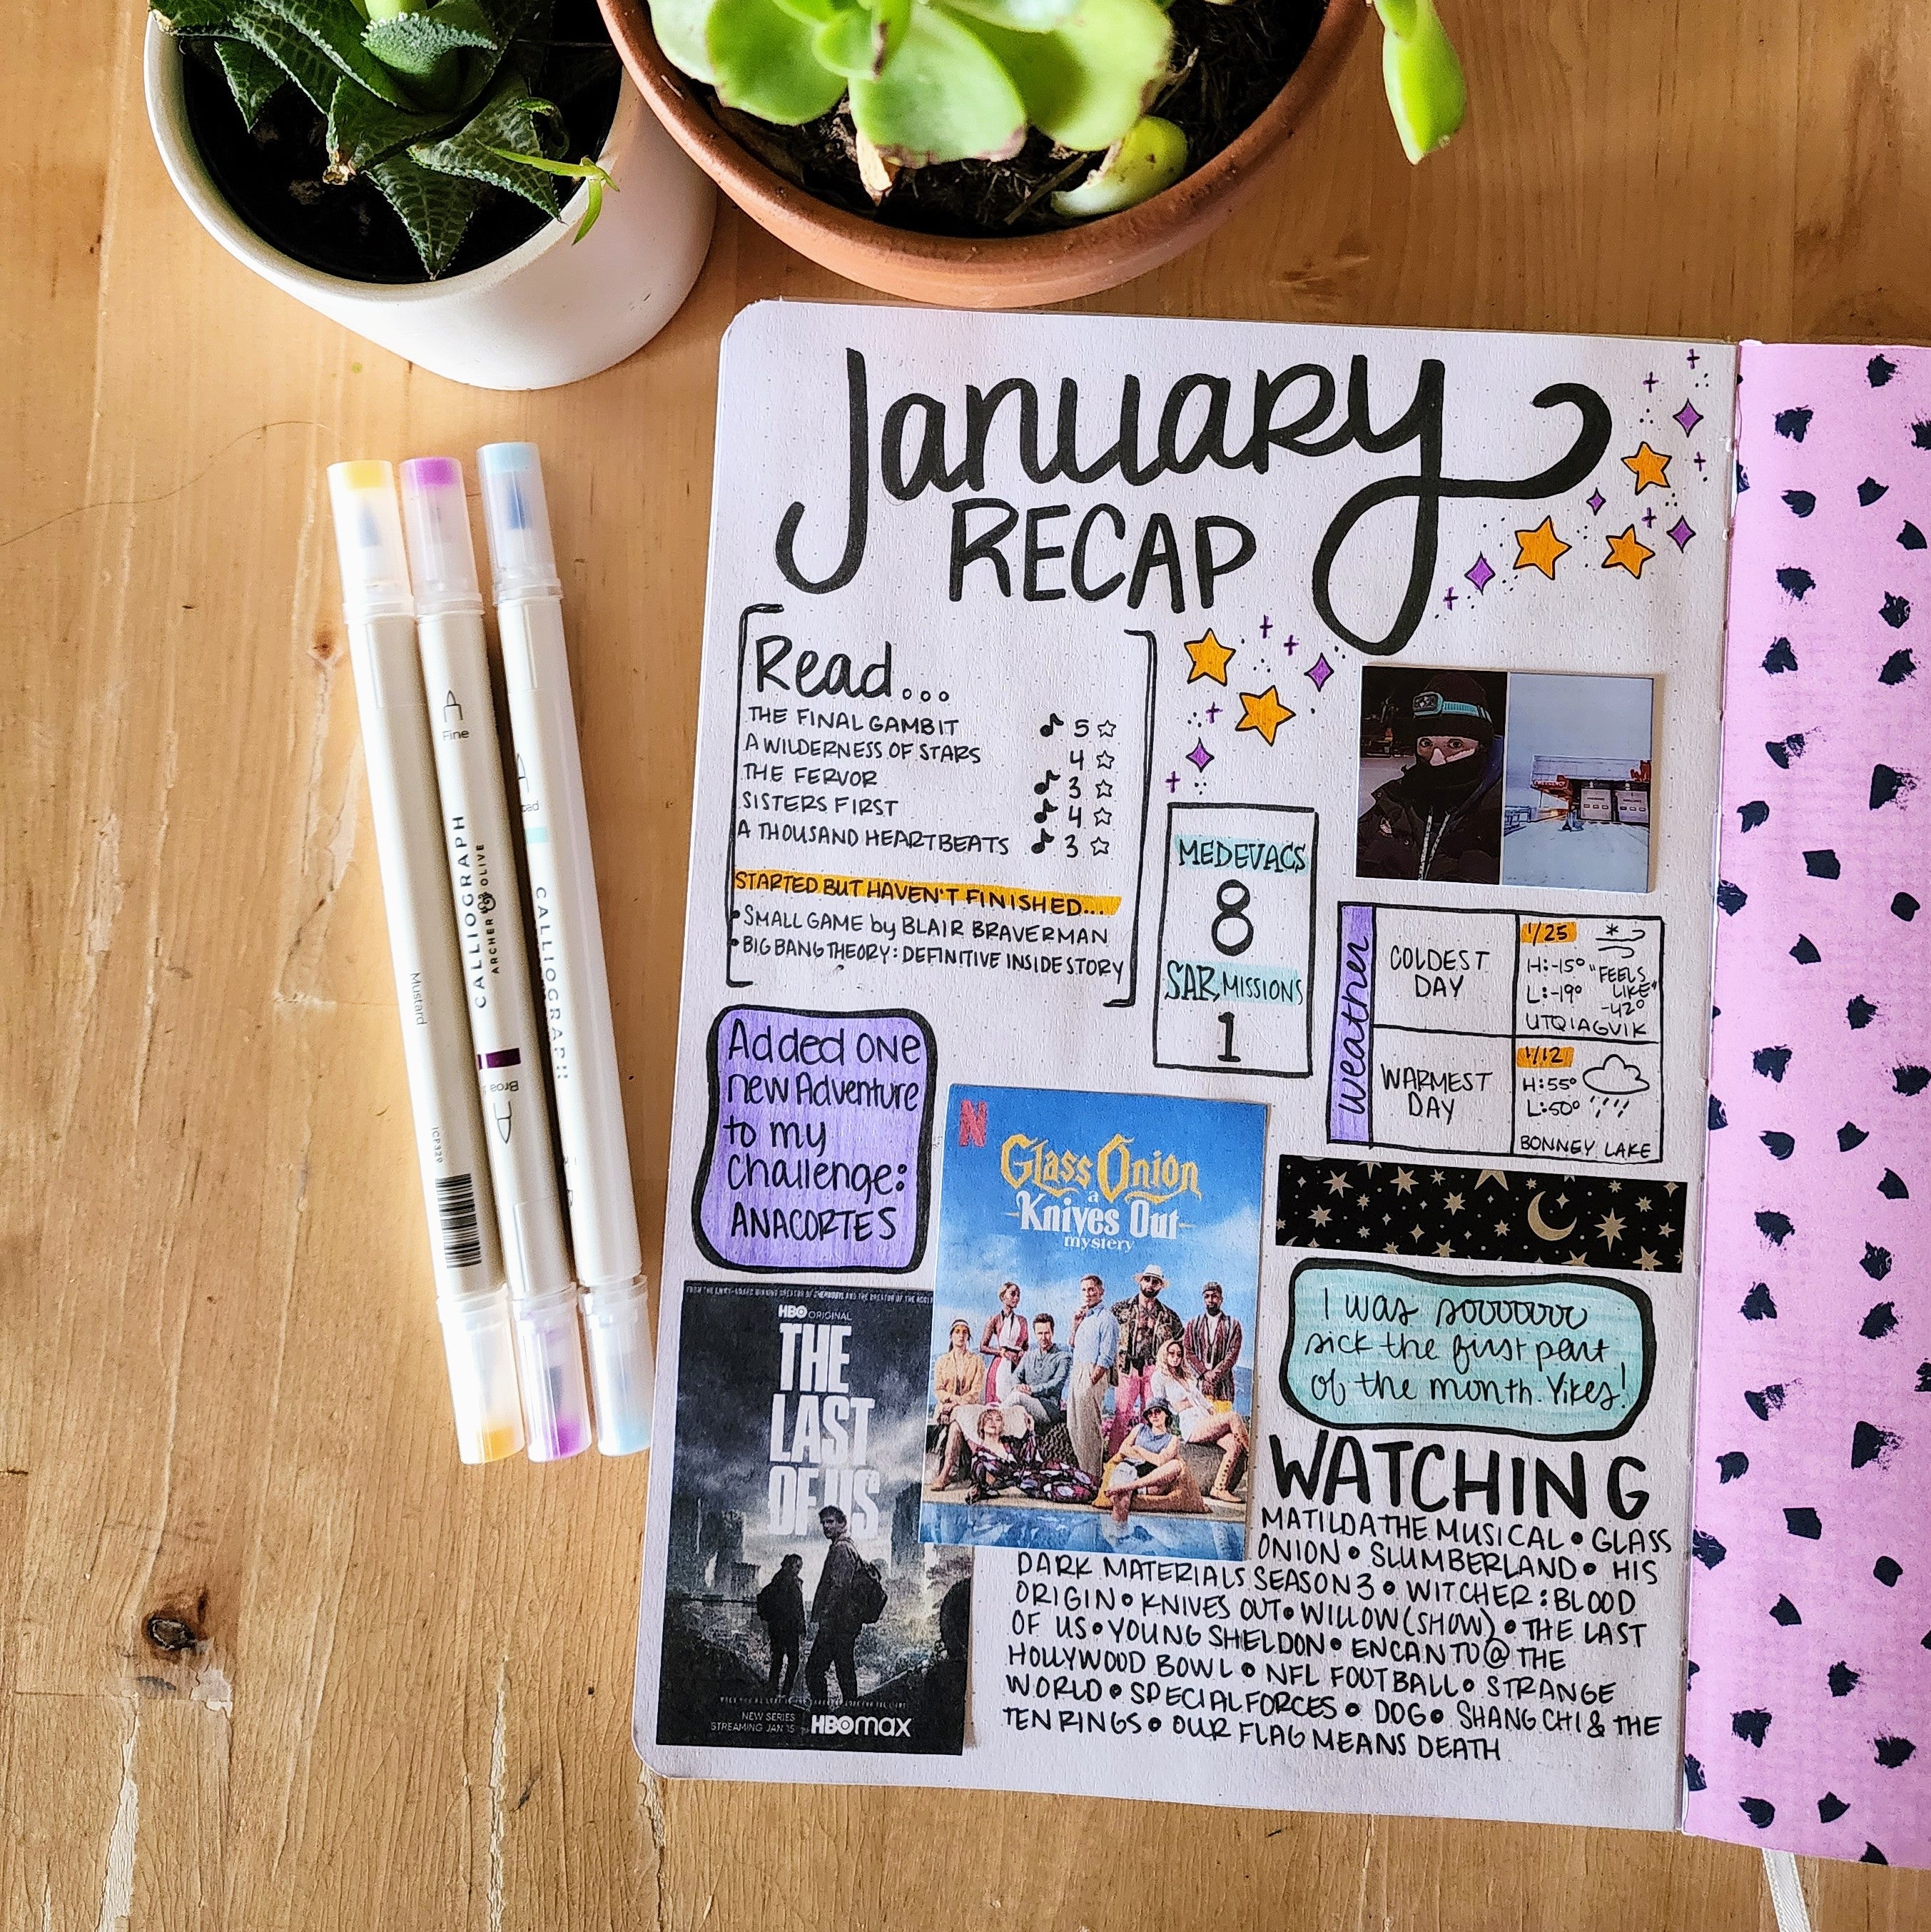 Get inspired with these creative bullet journal ideas!